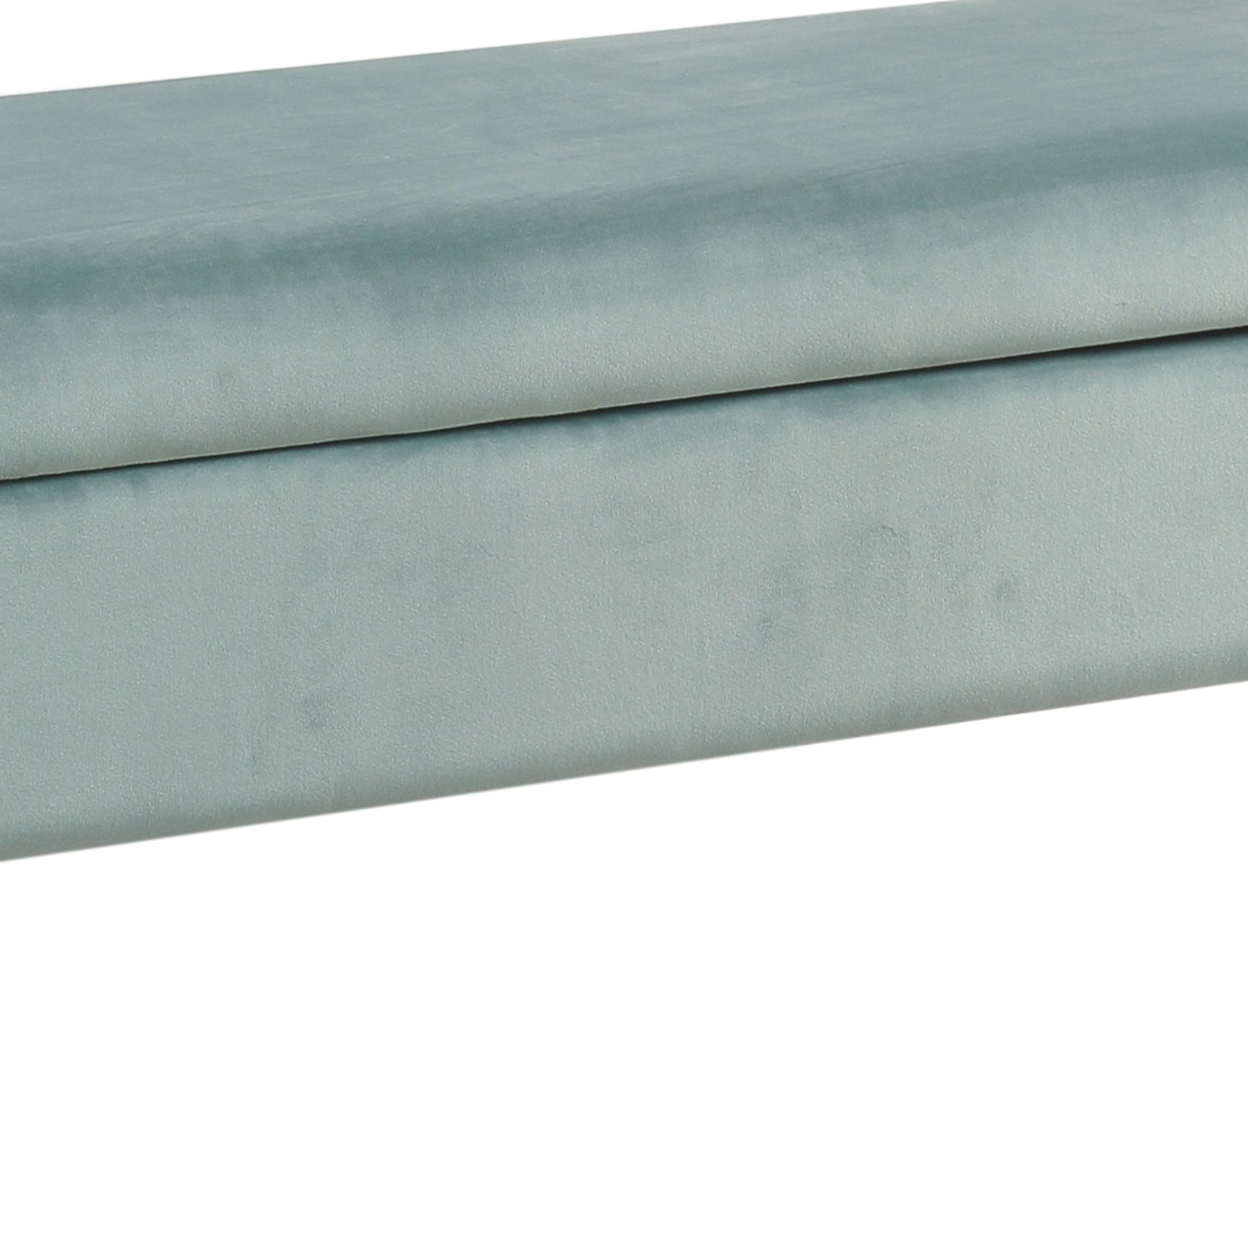 Velvet Upholstered Wooden Bench With Lift Top Storage And Tapered Feet, Aqua Blue- Saltoro Sherpi